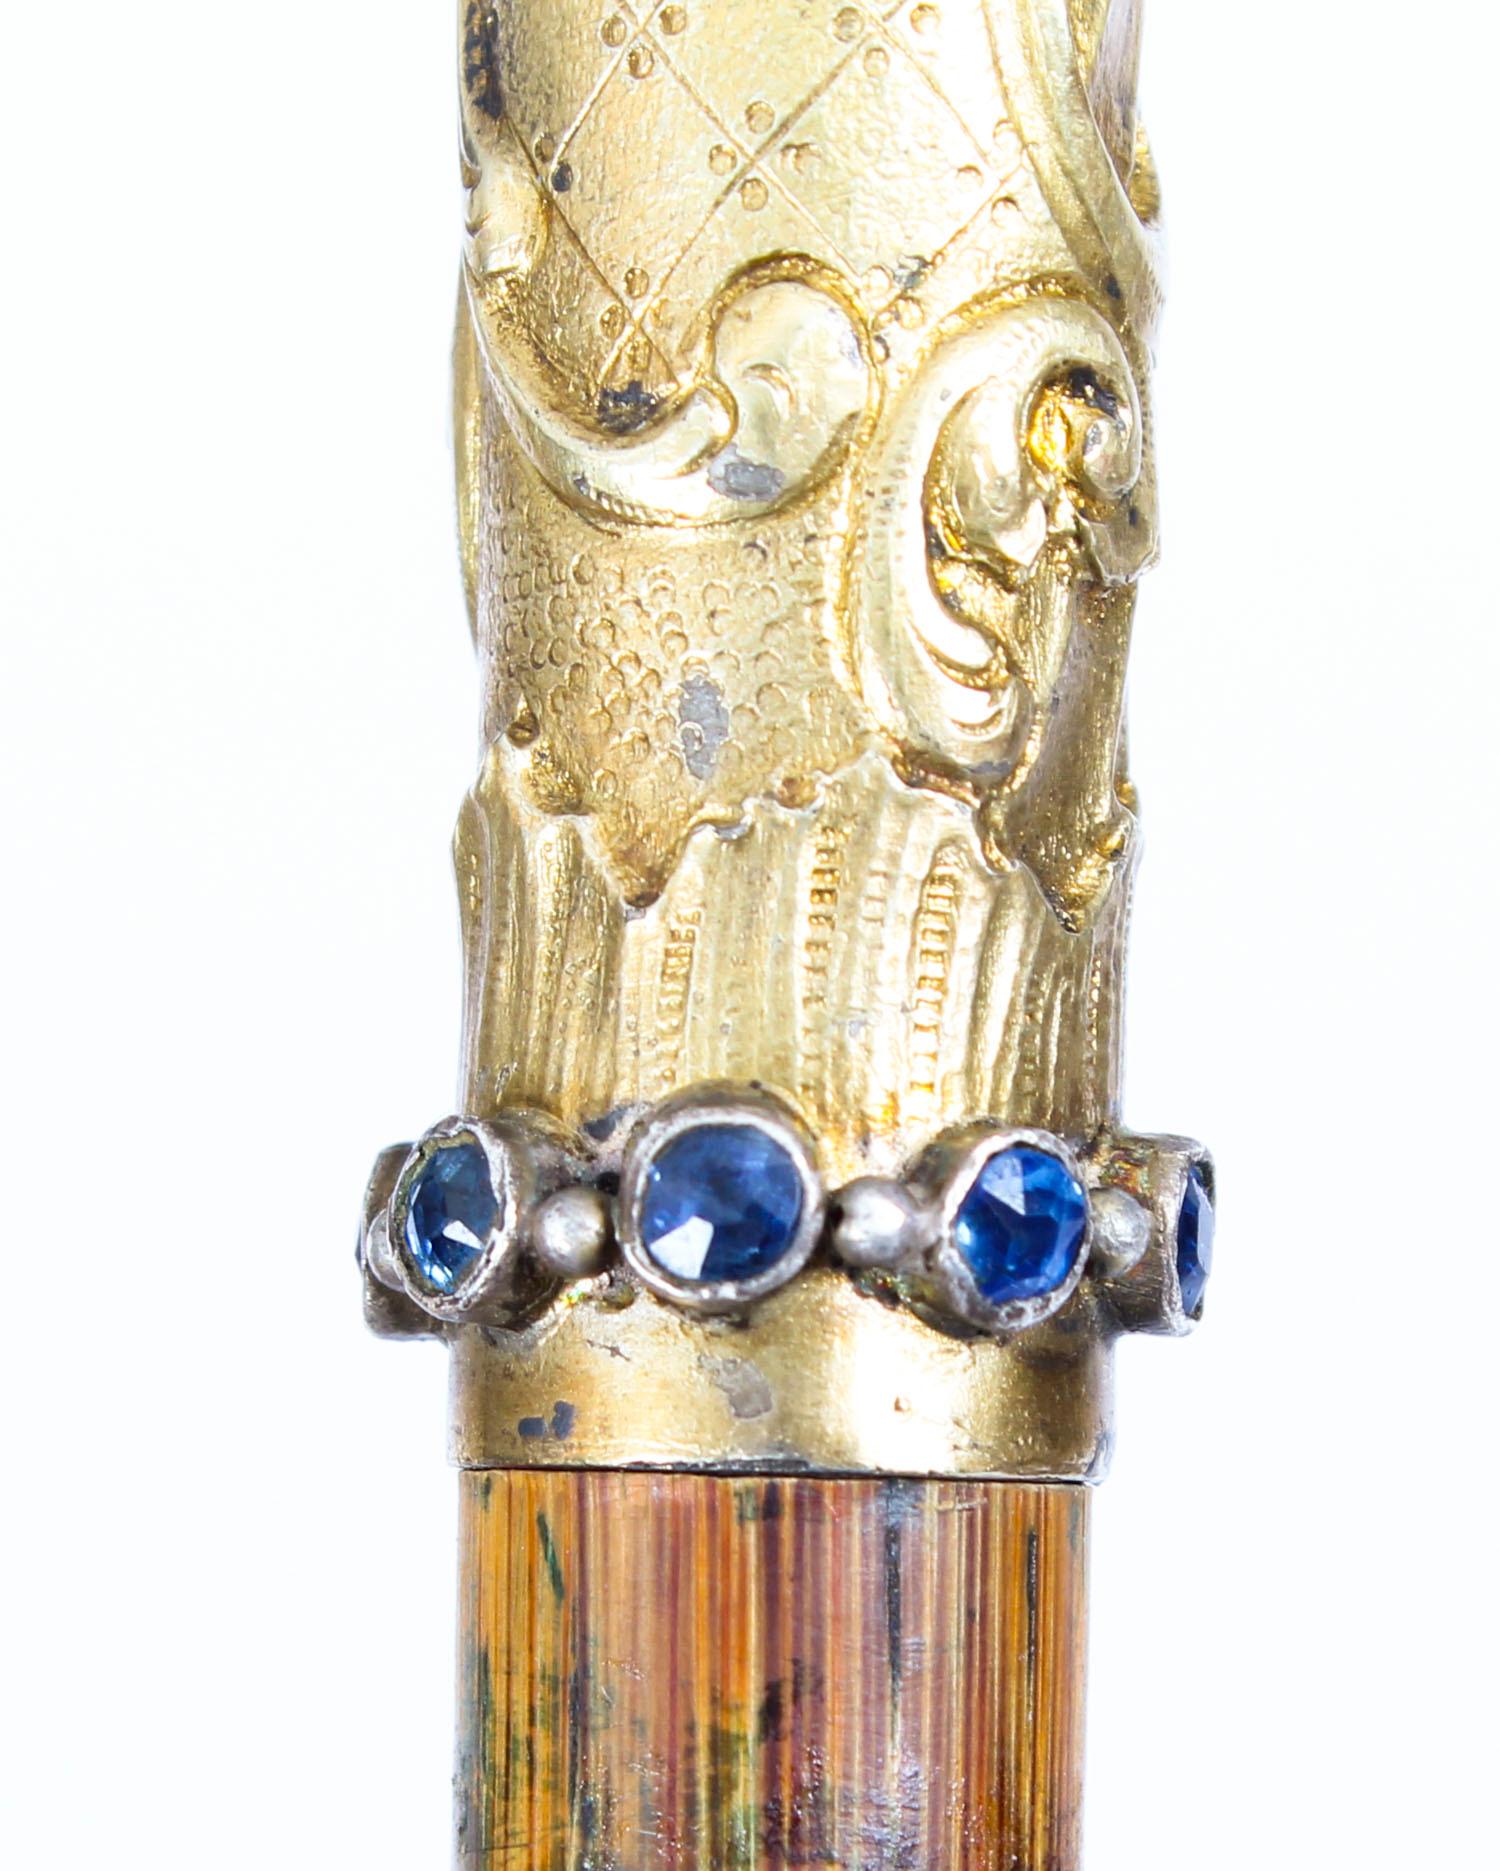 Antique Austro Hungarian Gold-Plated Sapphires Walking Stick Cane, 19th Century 9